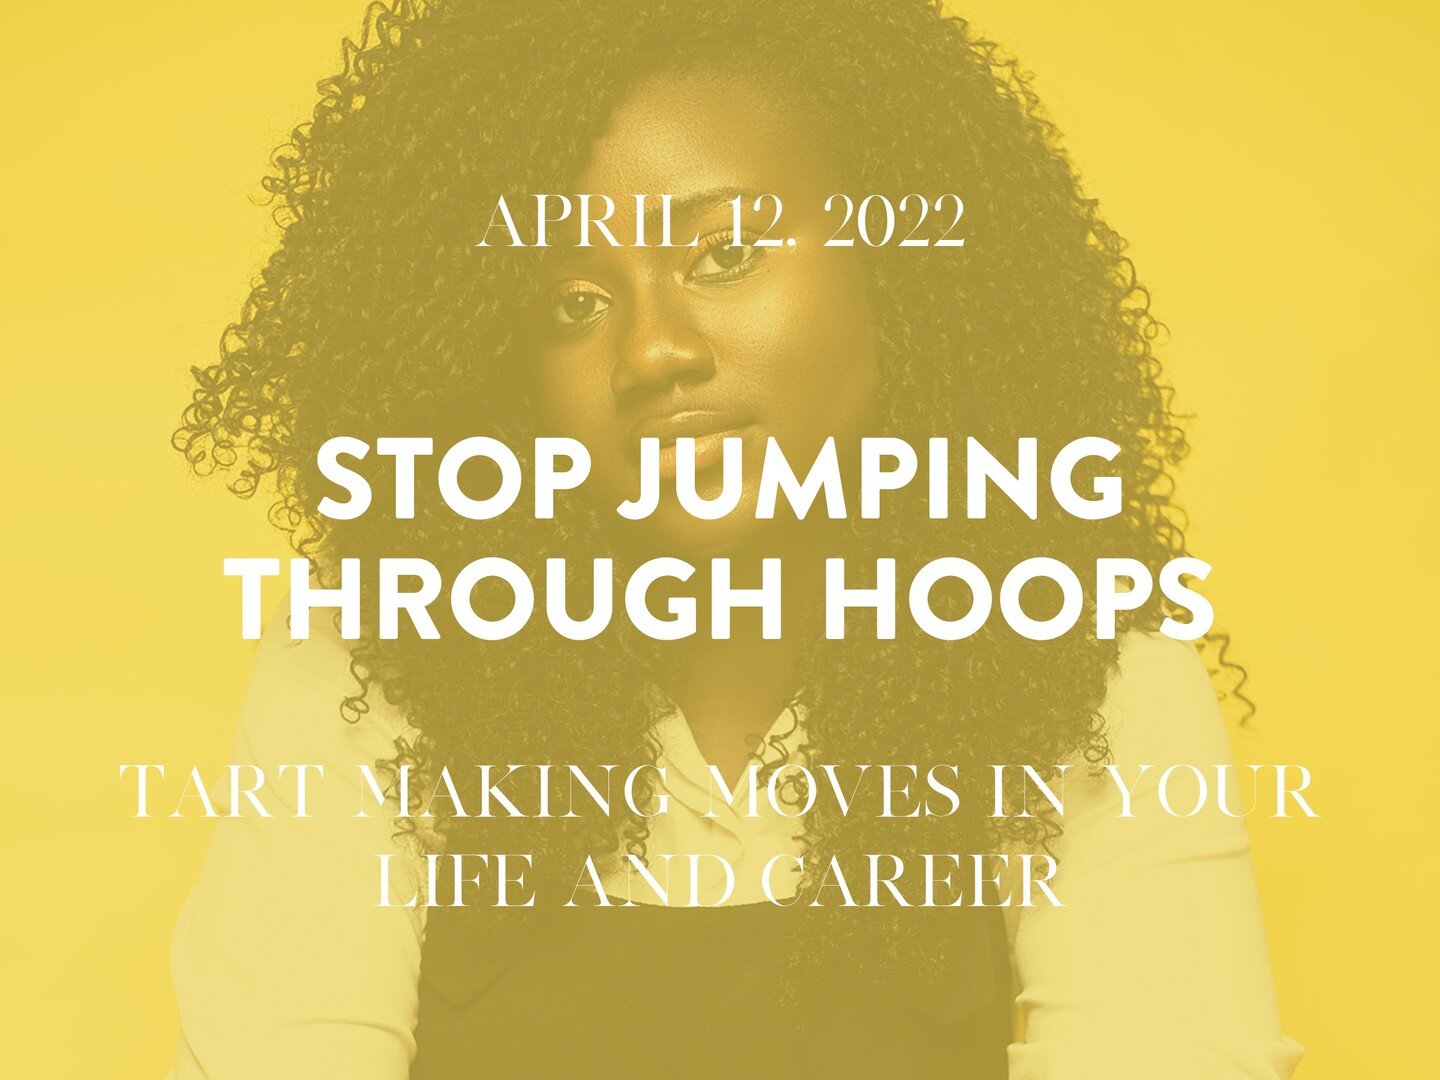 On this week&rsquo;s episode, we talk about people-pleasing and how you can stop jumping through hoops and start making moves in your life and career.

TVT: Home Edit

#podernfamily #podcast #podcastersofinstagram #blackpodcasts